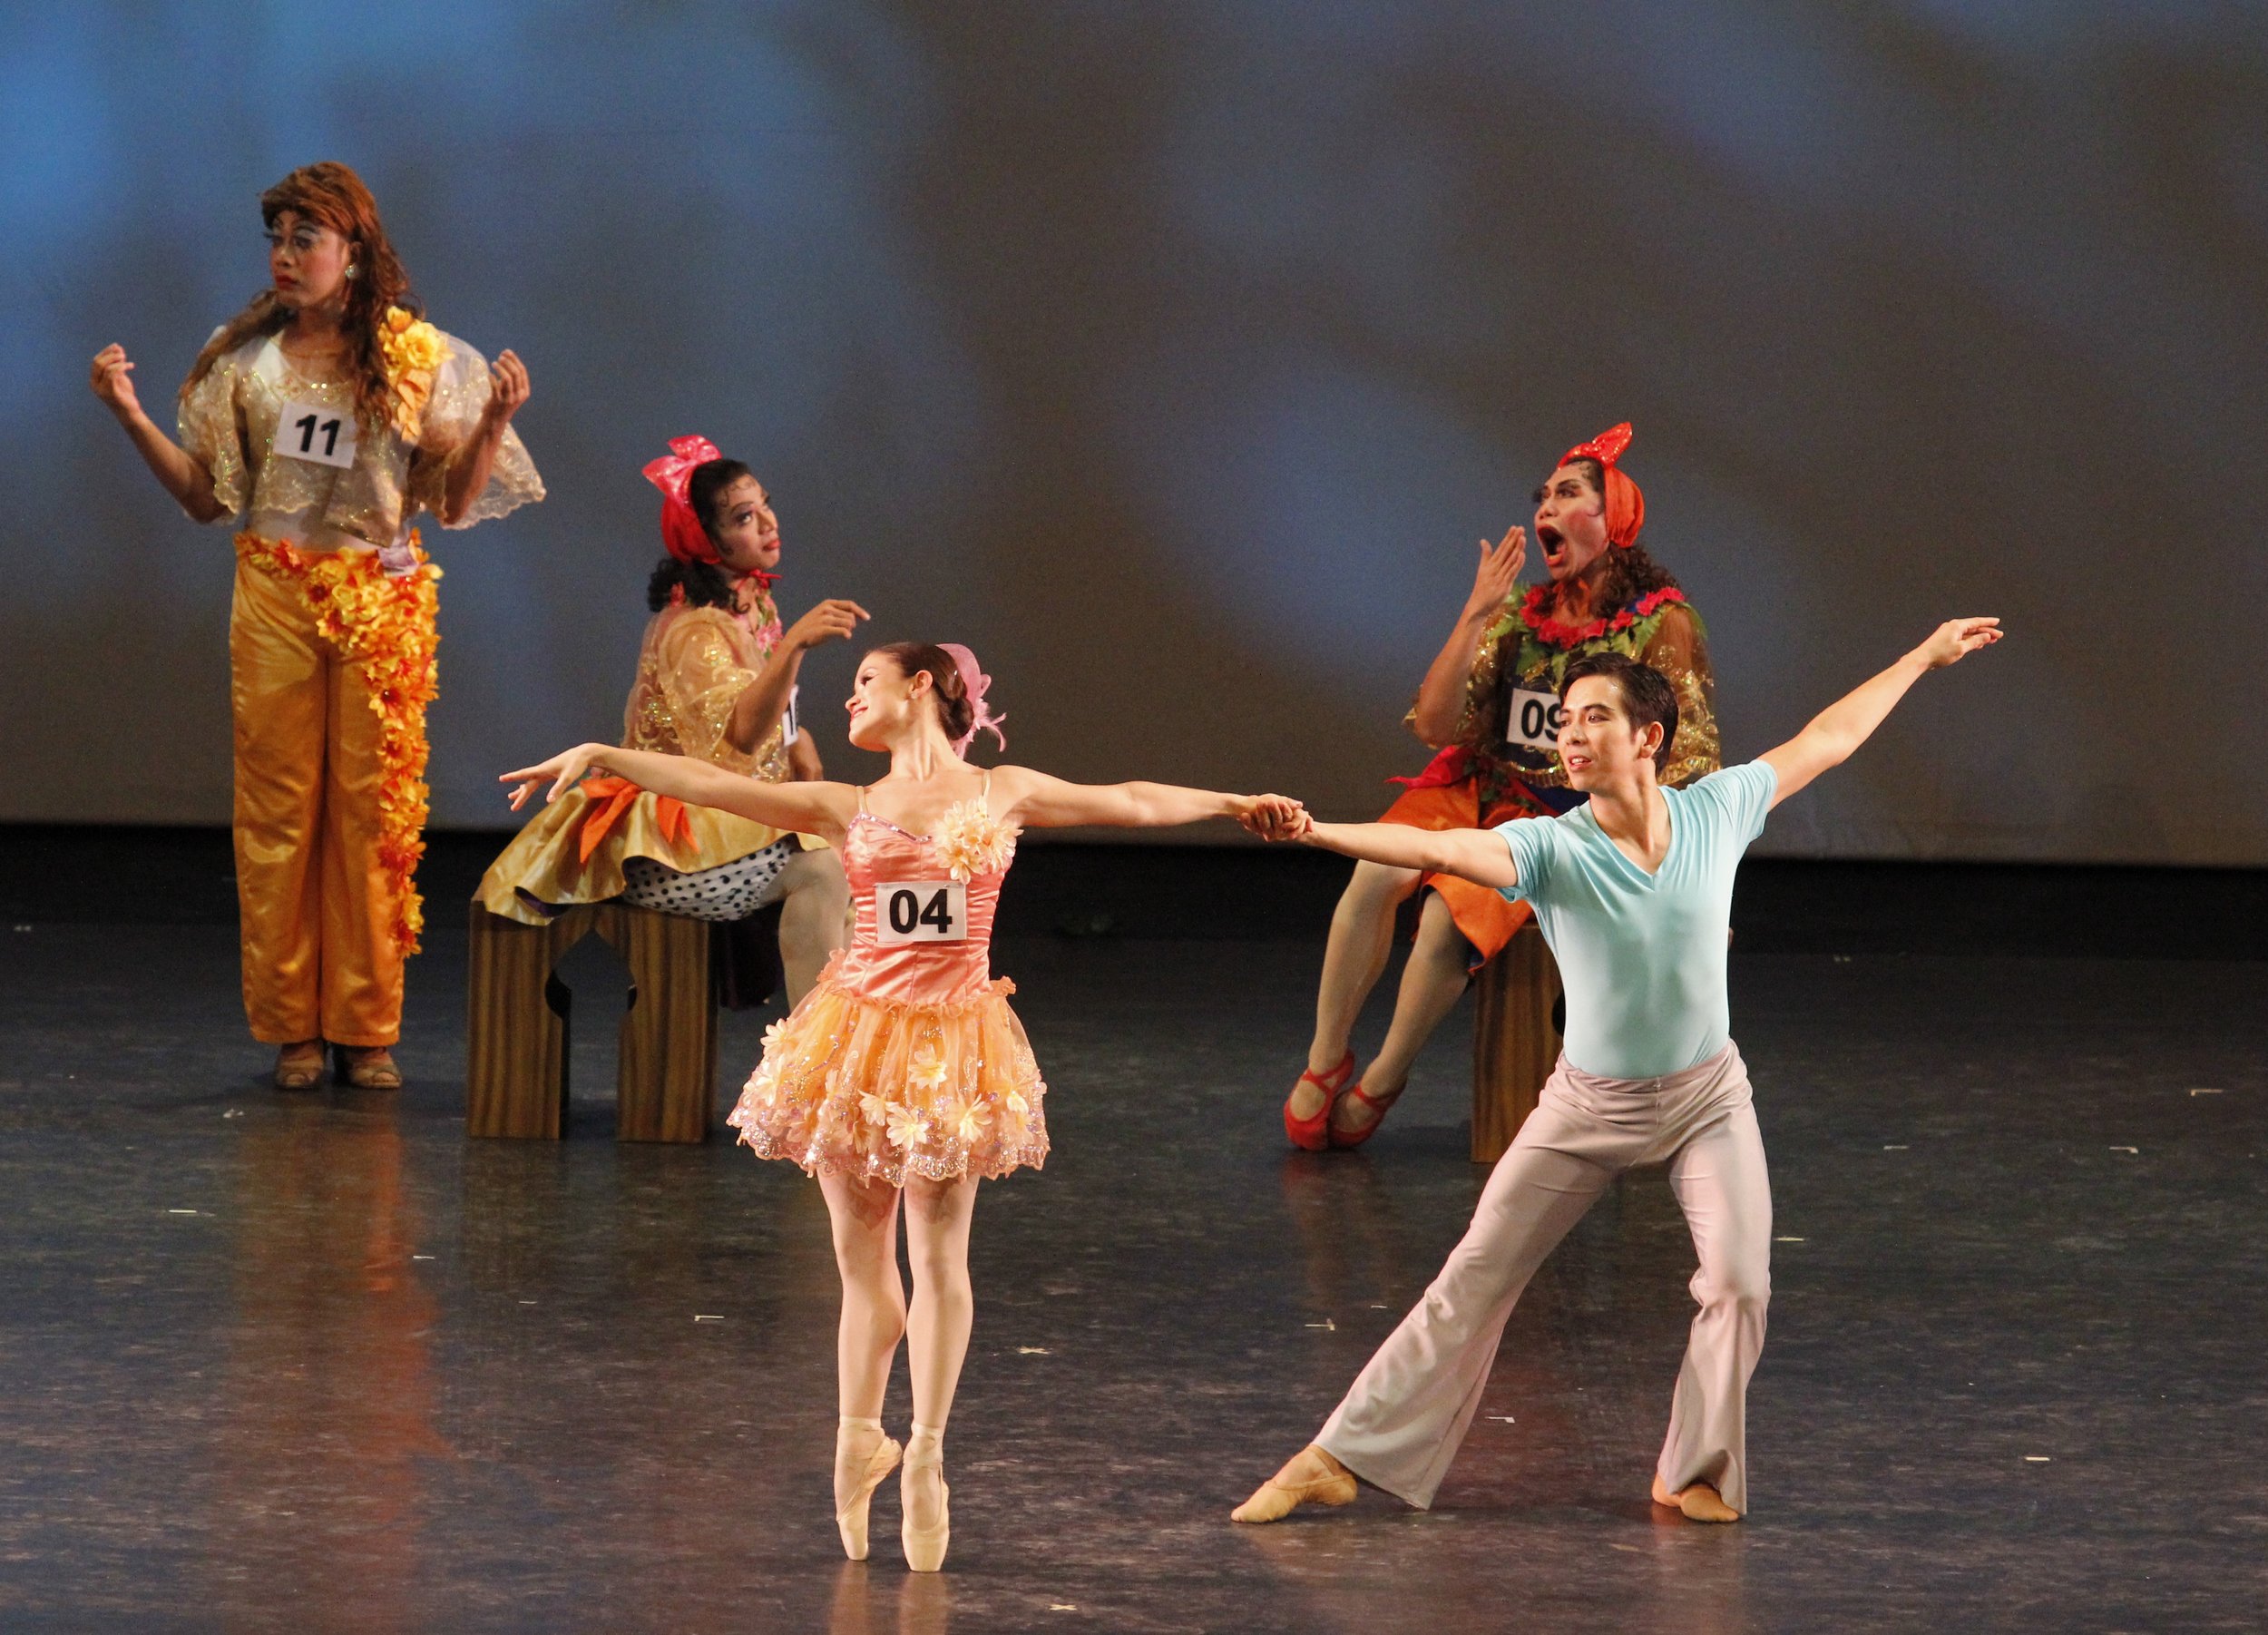    As an auditionee for a talent search in Hazel Sabas’  Sinderela  (2012), Tiffany Chiang-Janolo dons a peach-and-salmon mini decorated with floral appliqués as she and partner Francis Jaena try to catch the casting director’s attention. But her riv